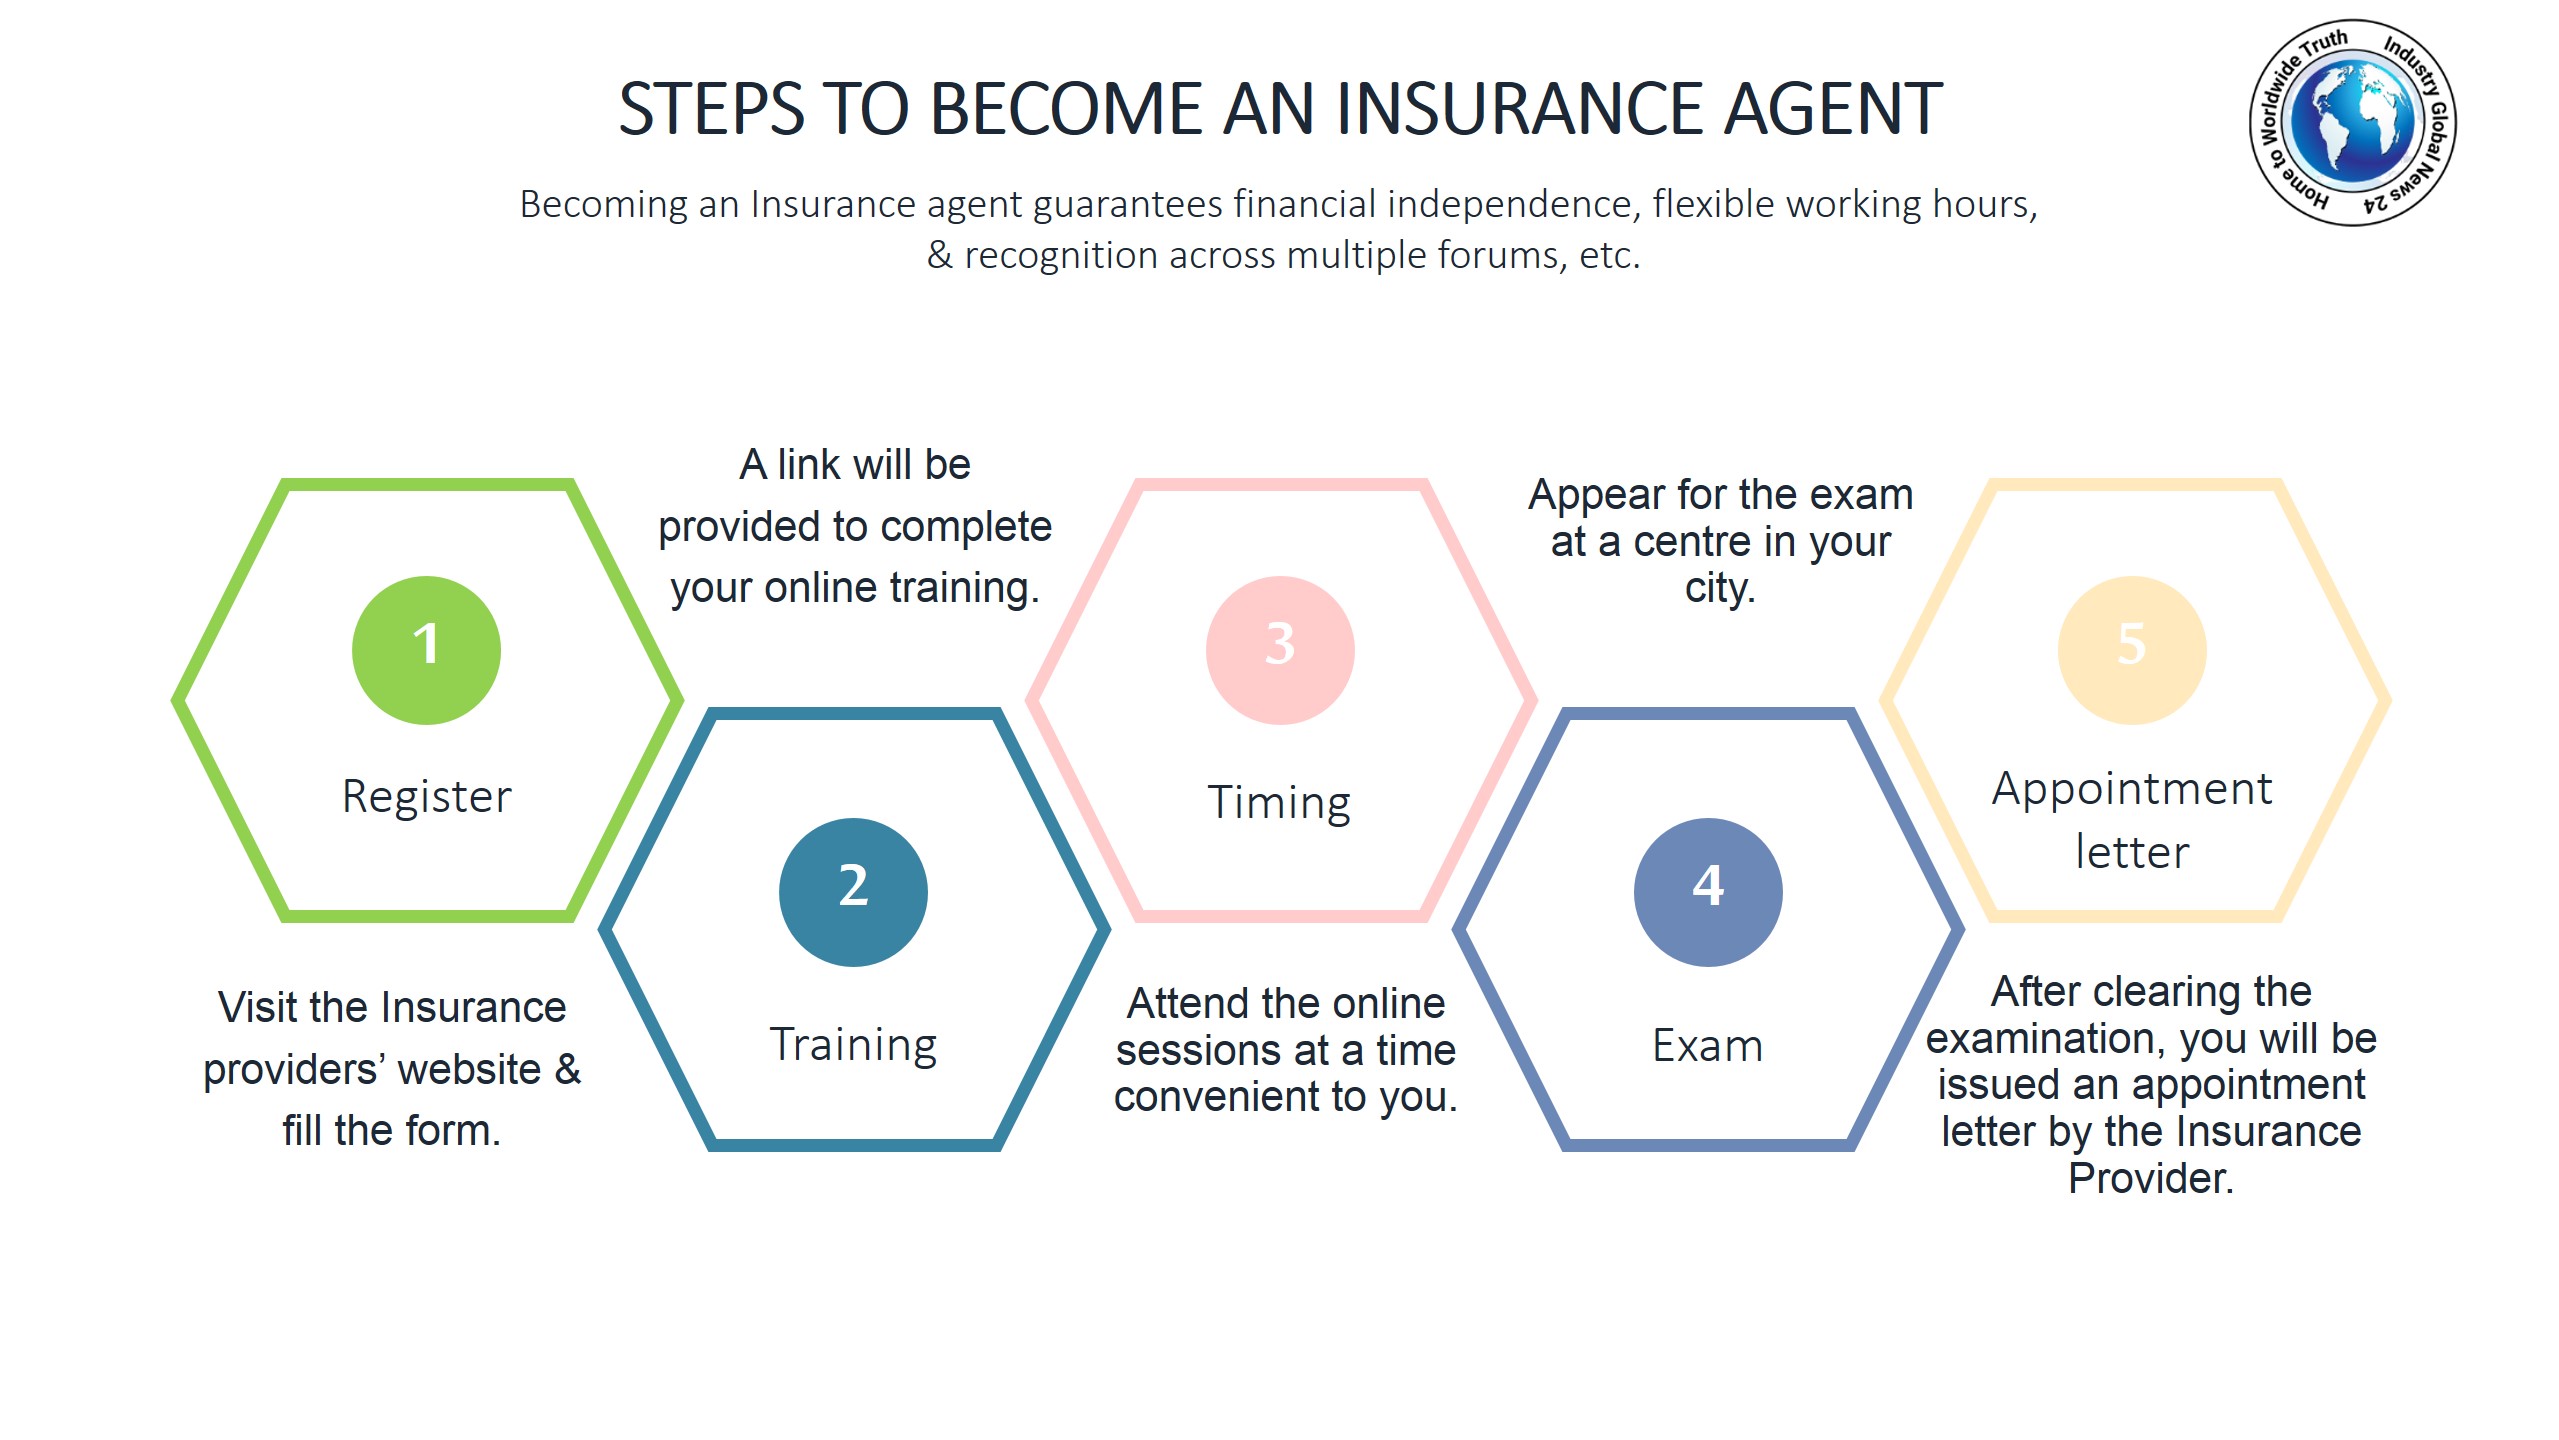 Steps to become an Insurance agent